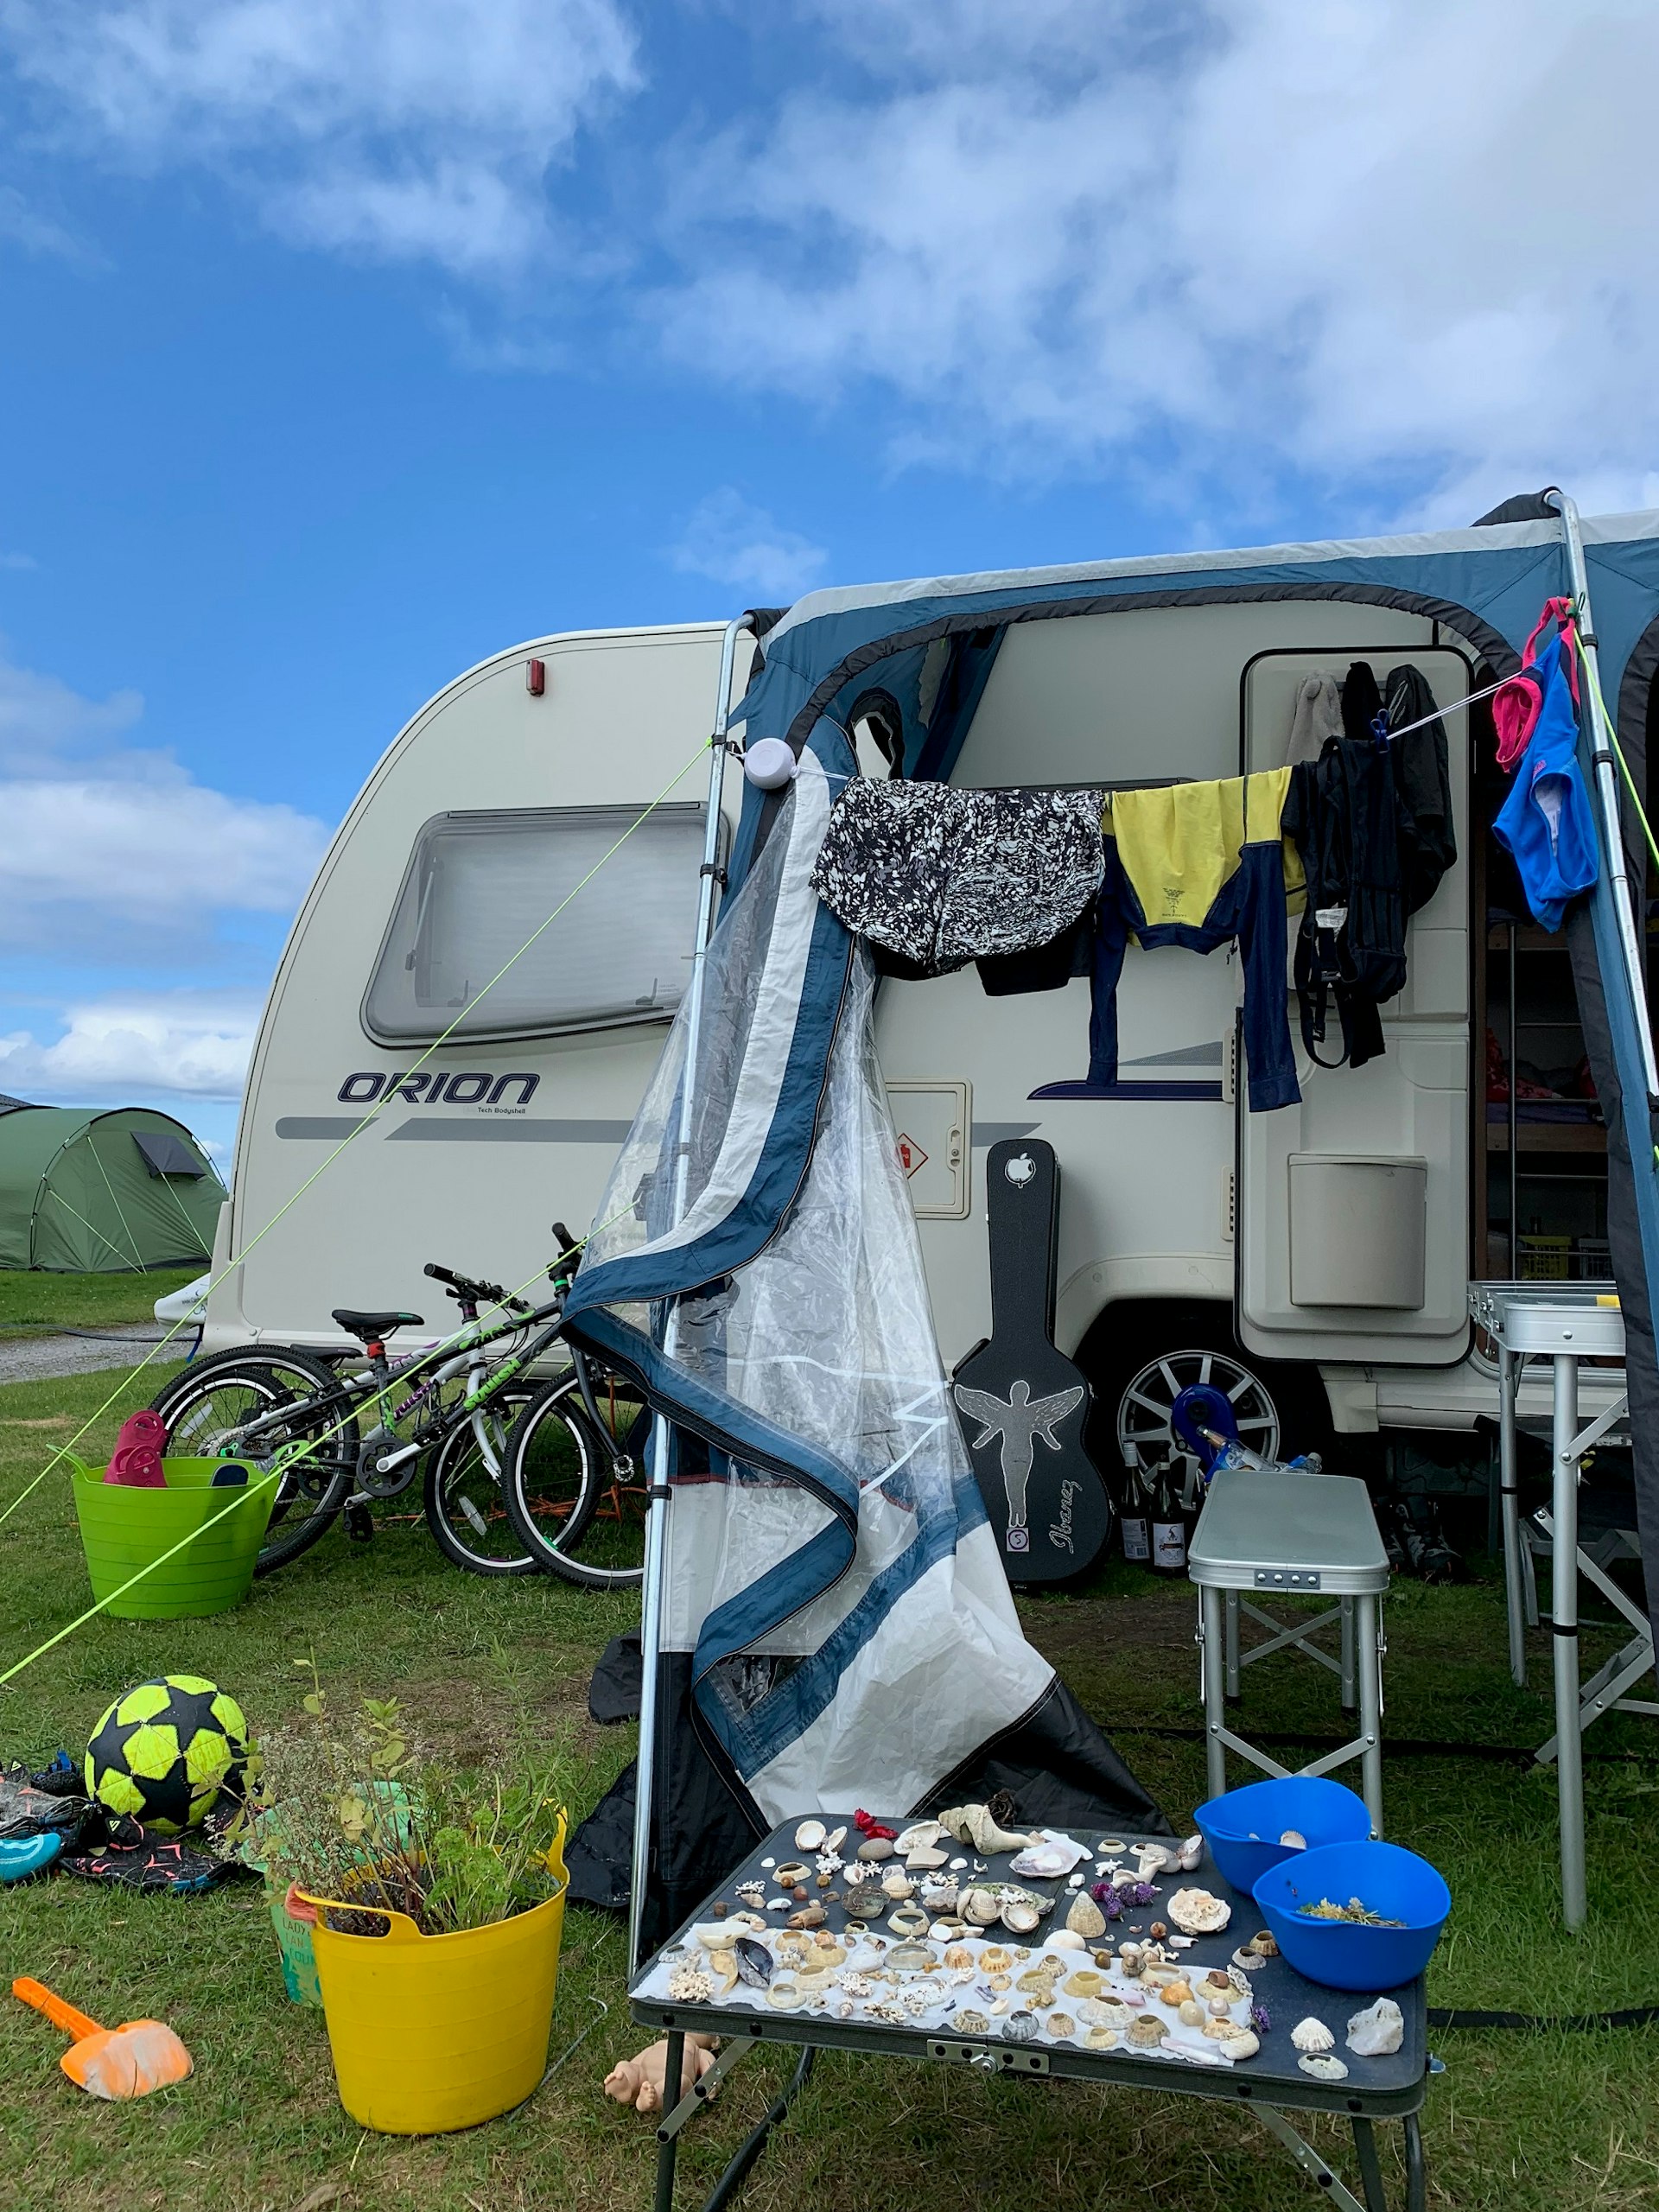 Exterior of a caravan with items scattered outside including bikes, a football, a spade, a guitar, a table covered in seashells and a washing line full of clothes.